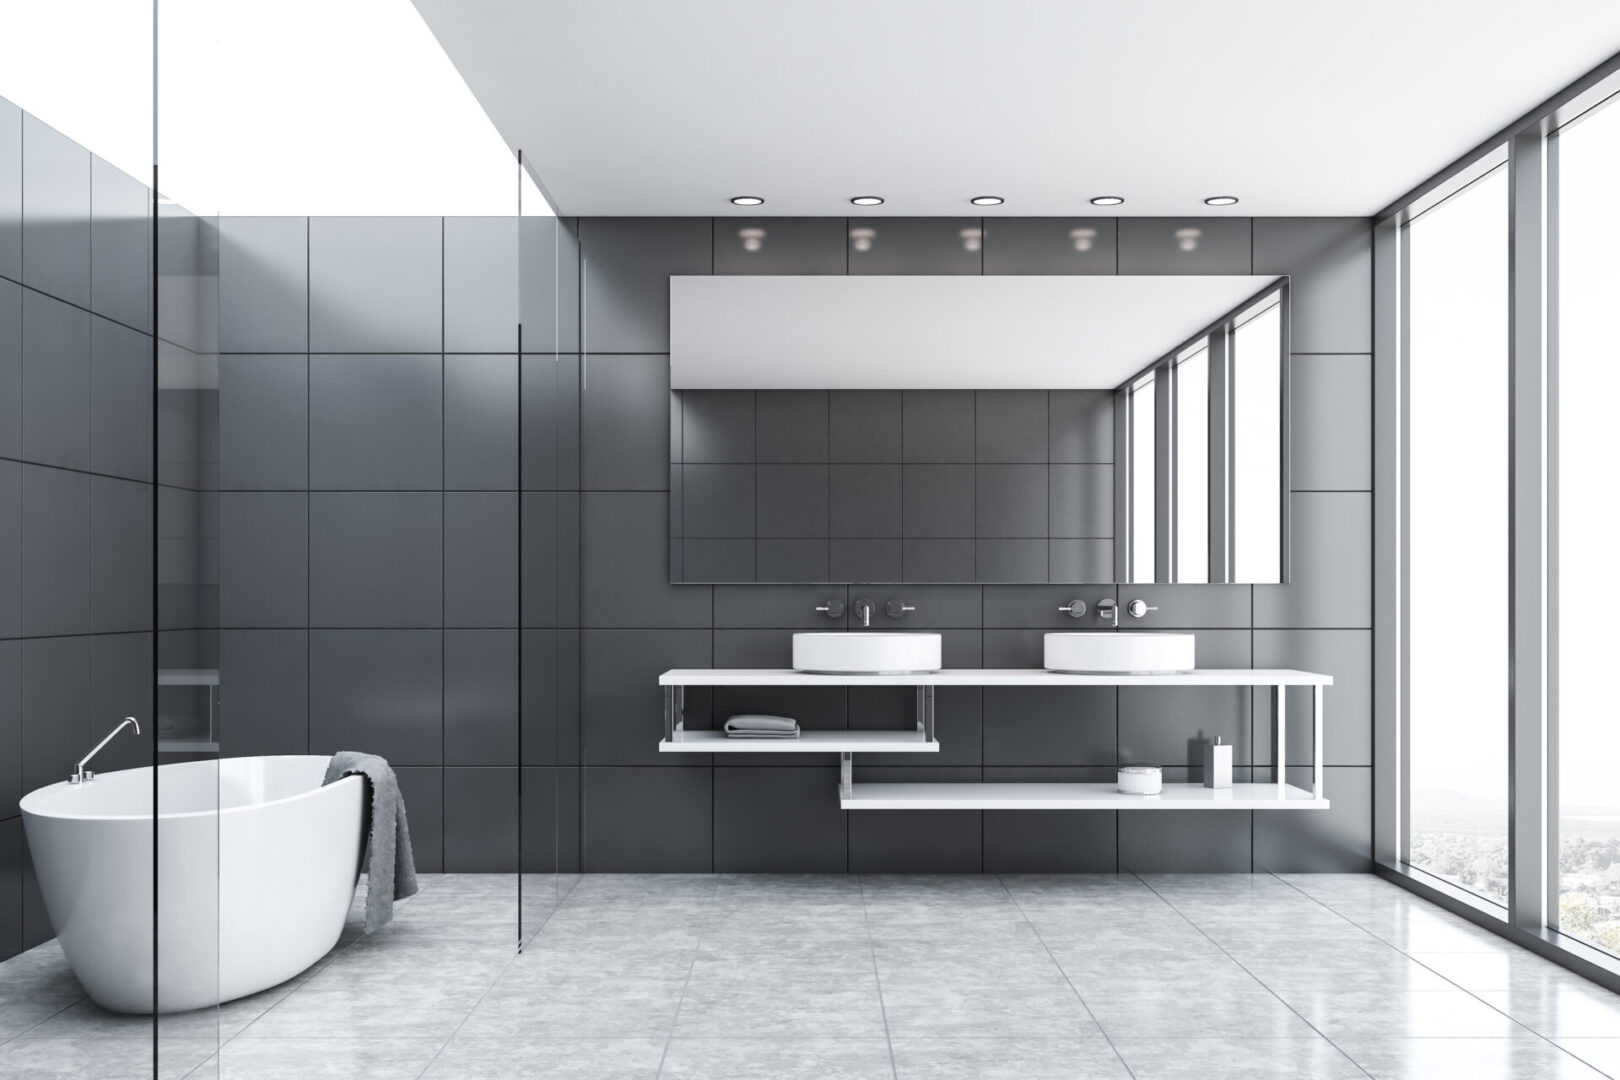 Interior,Of,Comfortable,Bathroom,With,Grey,Tile,And,Glass,Walls,